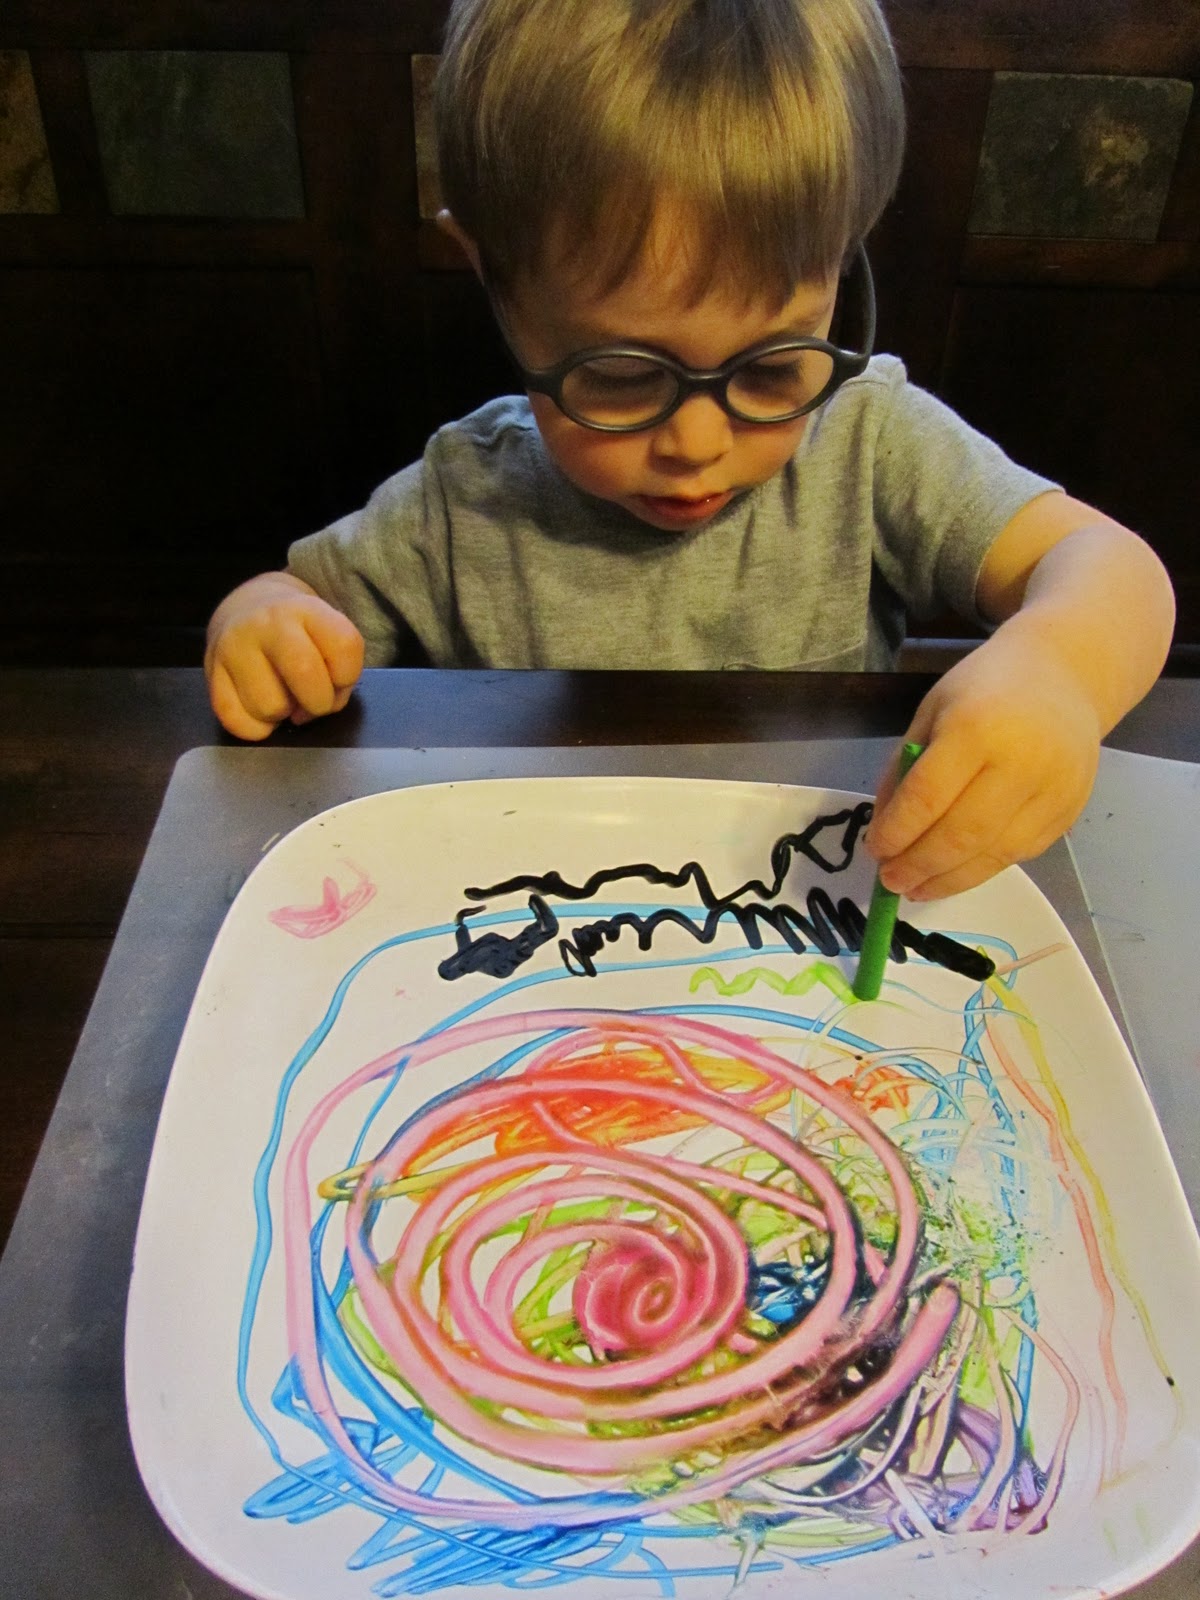 How To Melt Crayons - Little Bins for Little Hands